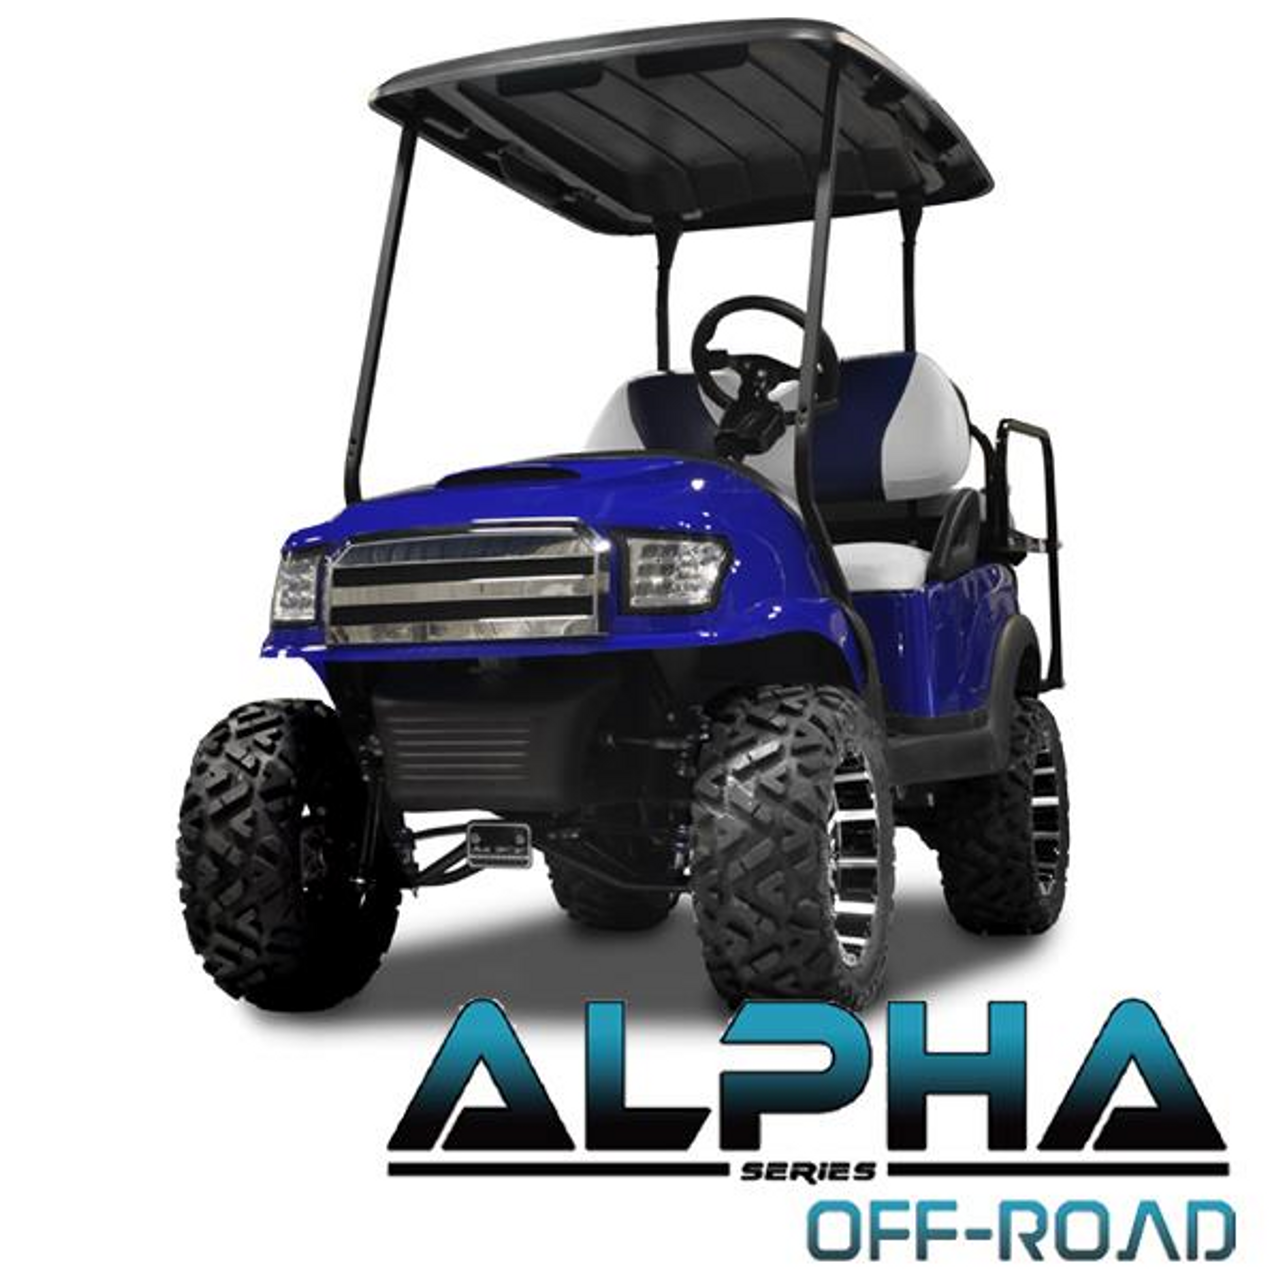 Club Car Precedent ALPHA Off-Road Front Cowl Kit in Blue (2004+), 05-027CO